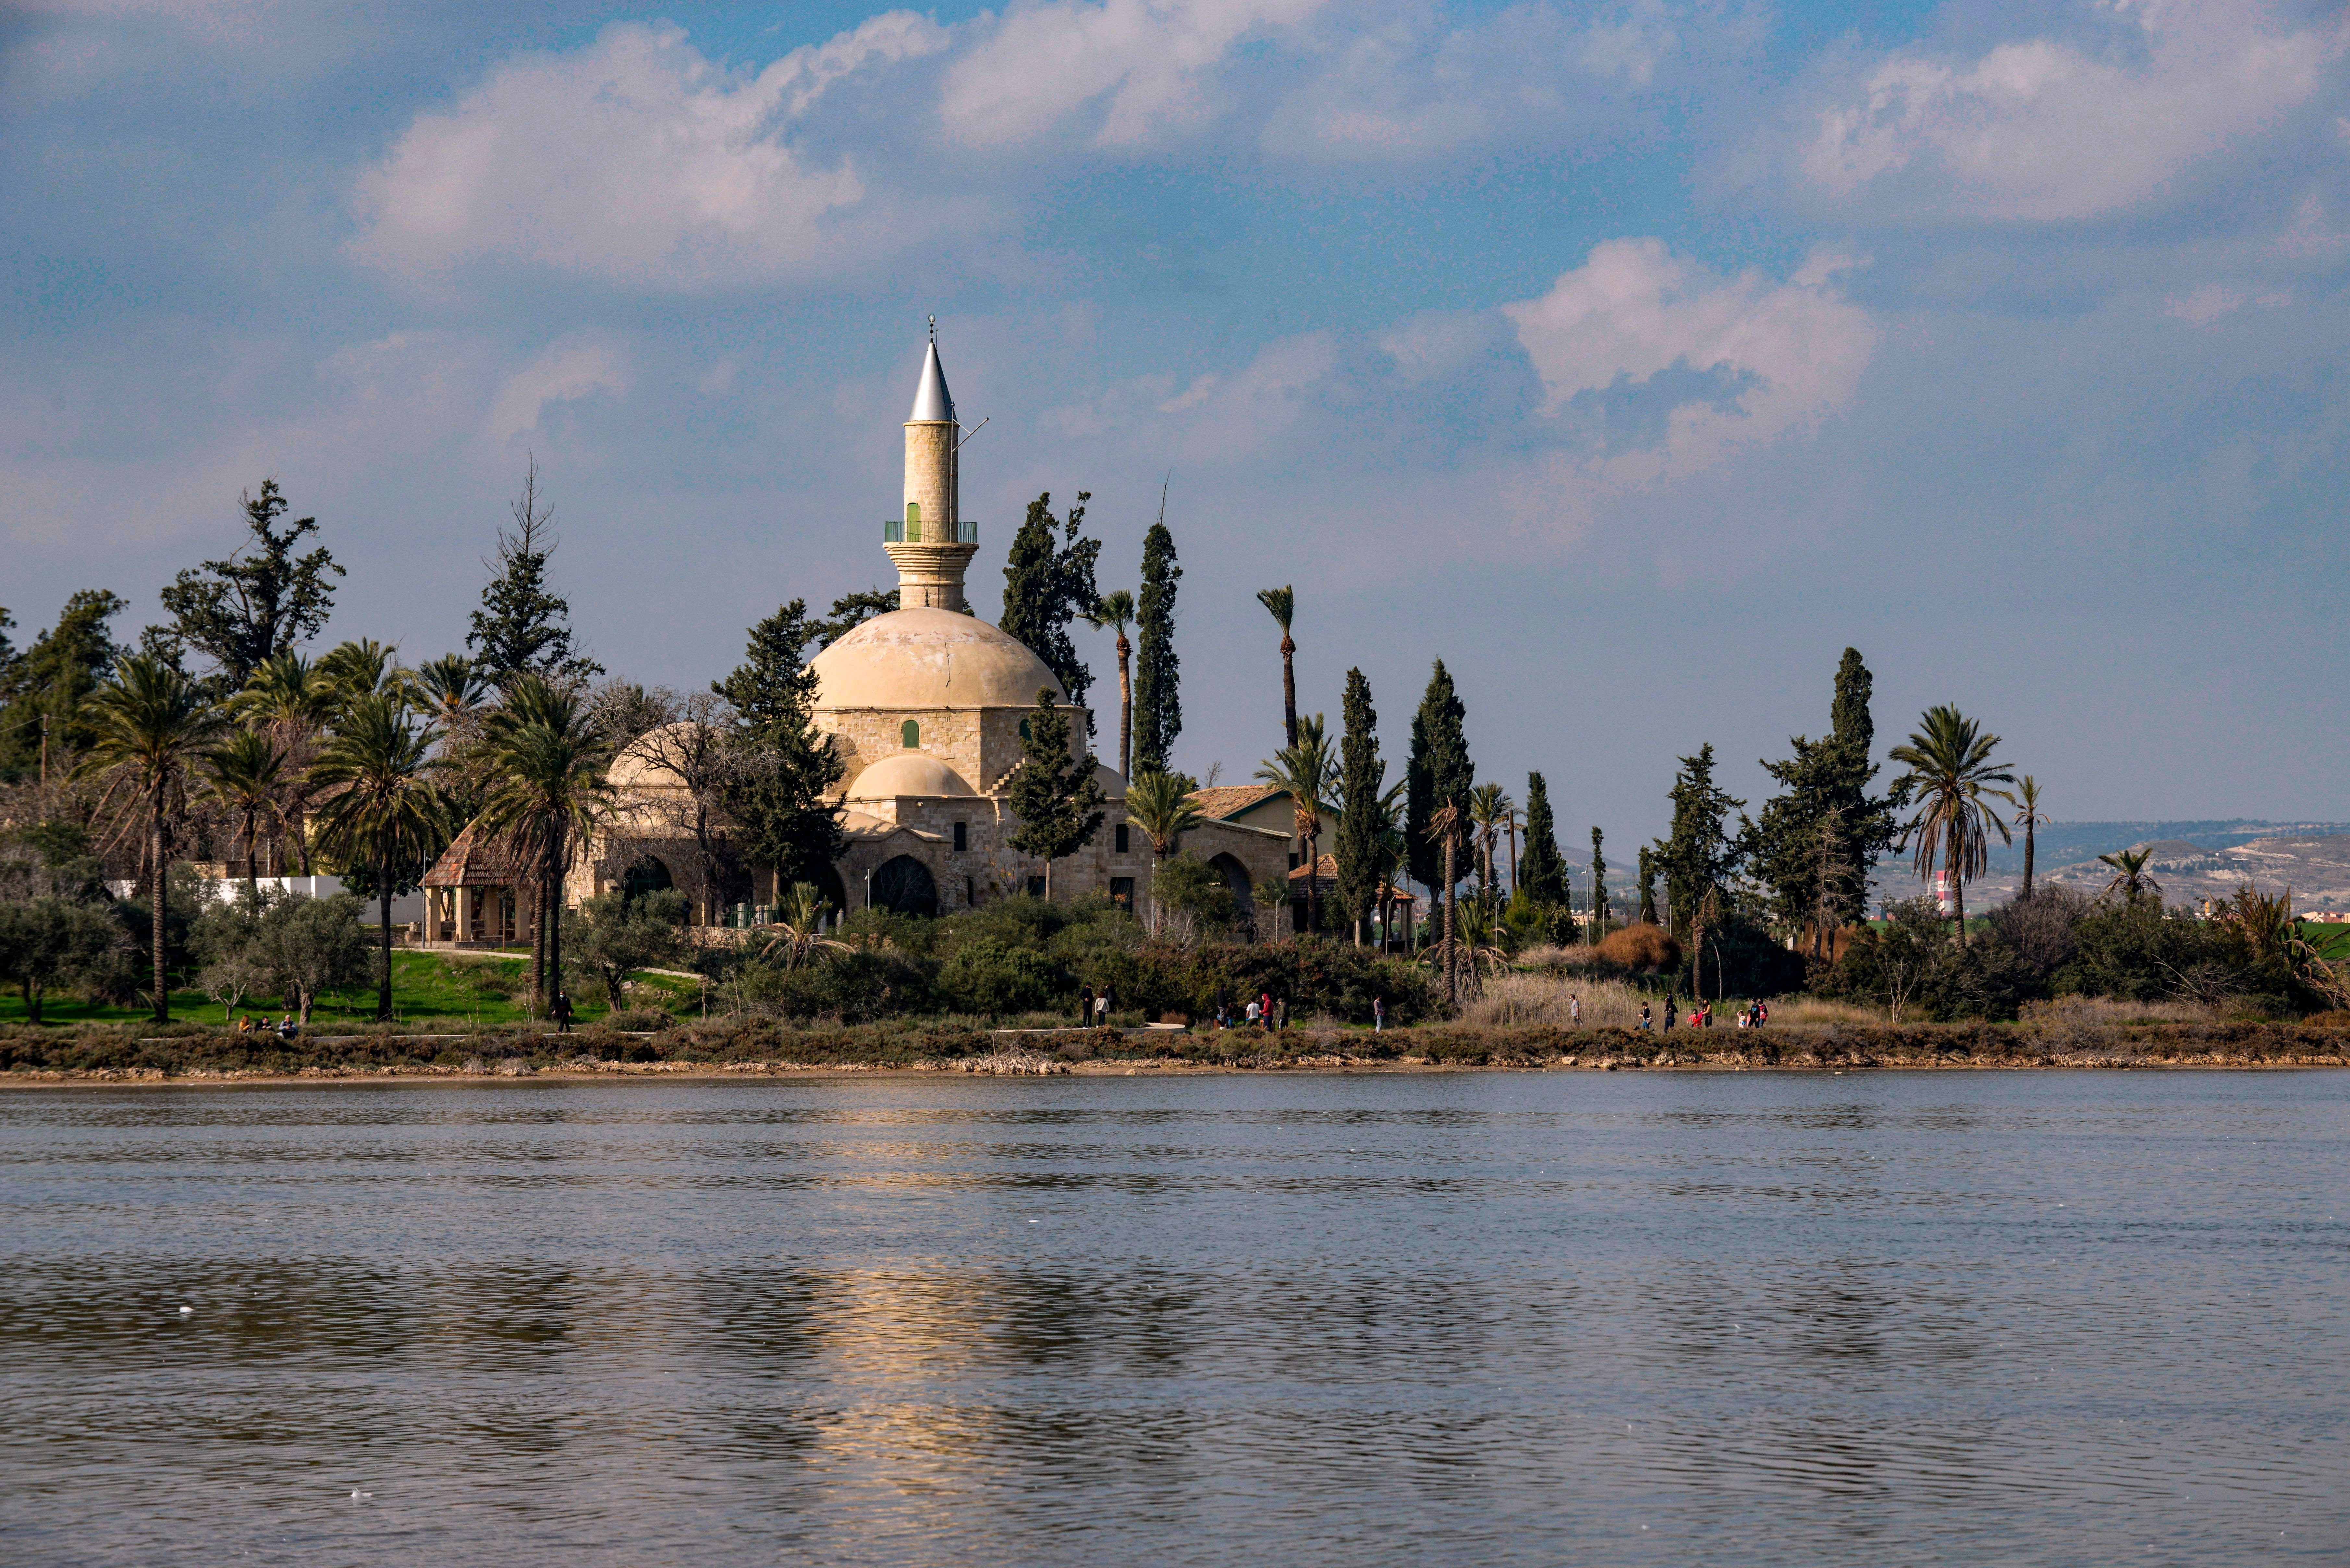 Photo taken on 20 December, 2020 shows a view of the historic 19th century Hala Sultan Tekke mosque overlooking the salt lake in Cyprus’ coastal city of Larnaca.